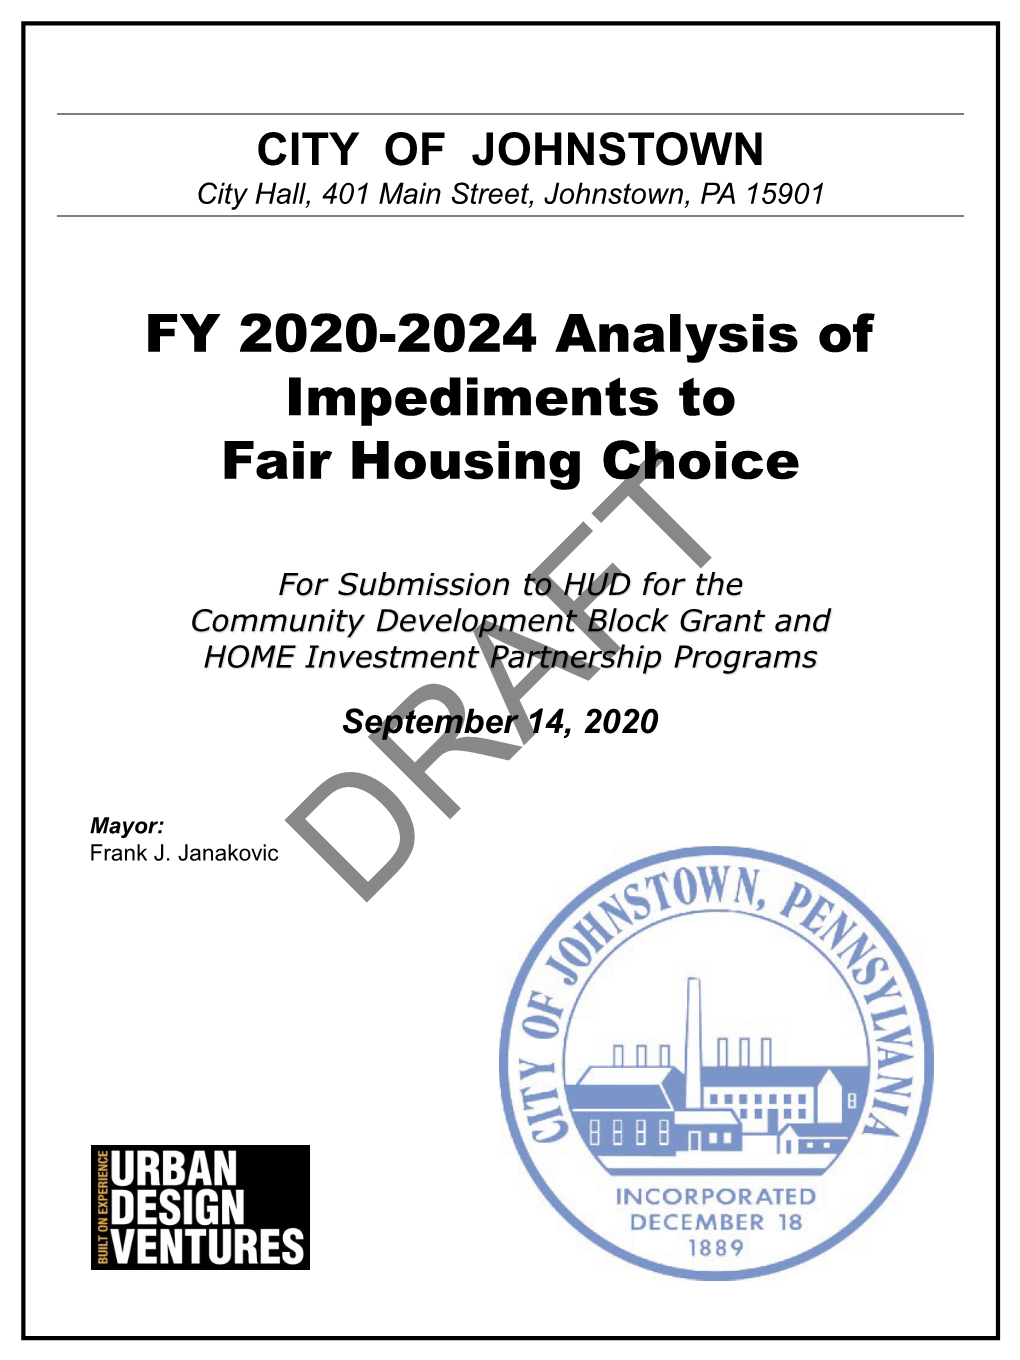 FY 2020-2024 Analysis of Impediments to Fair Housing Choice